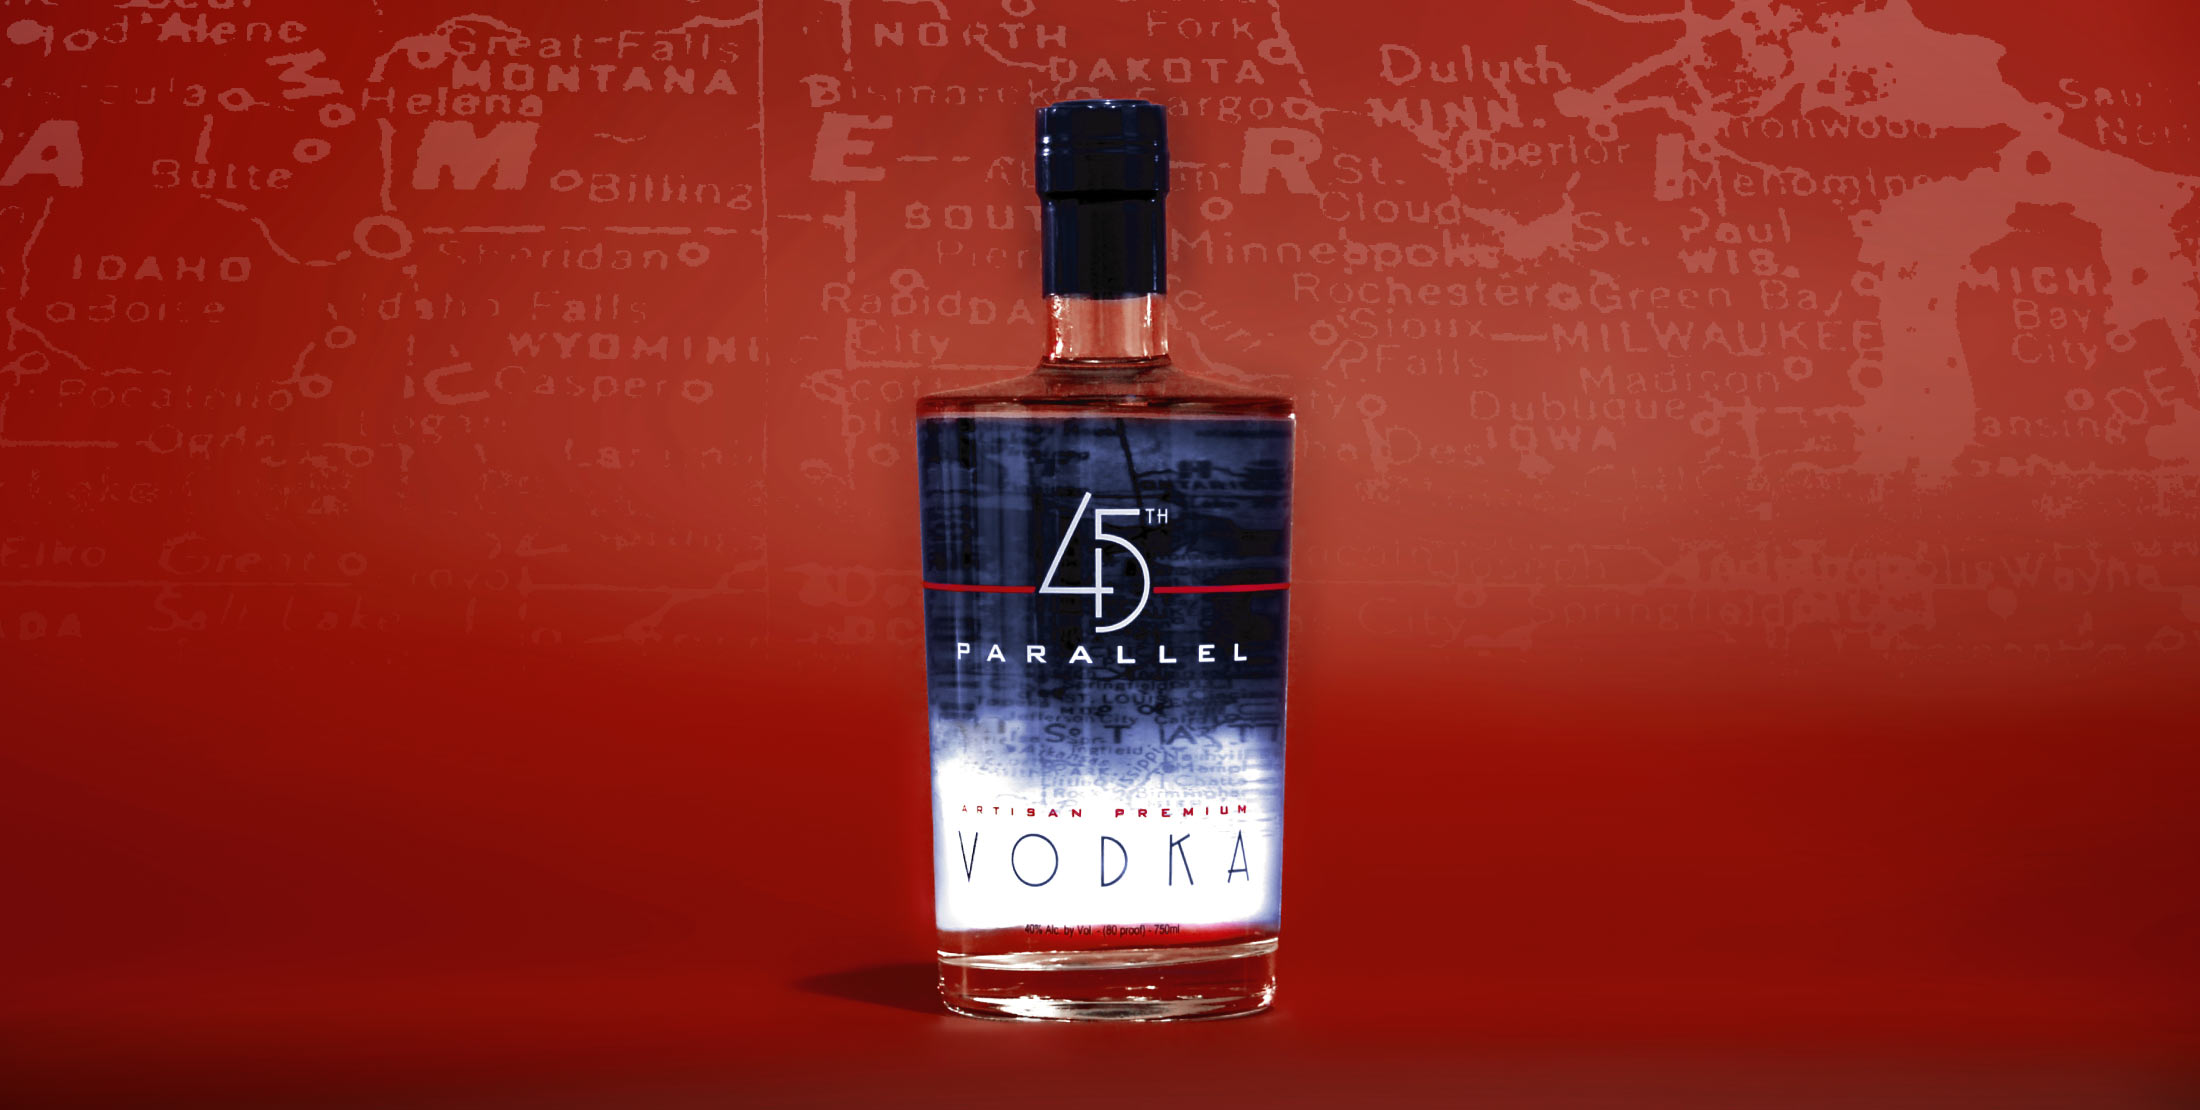 A vodka bottle photographed on a red background. 45th parallel vodka